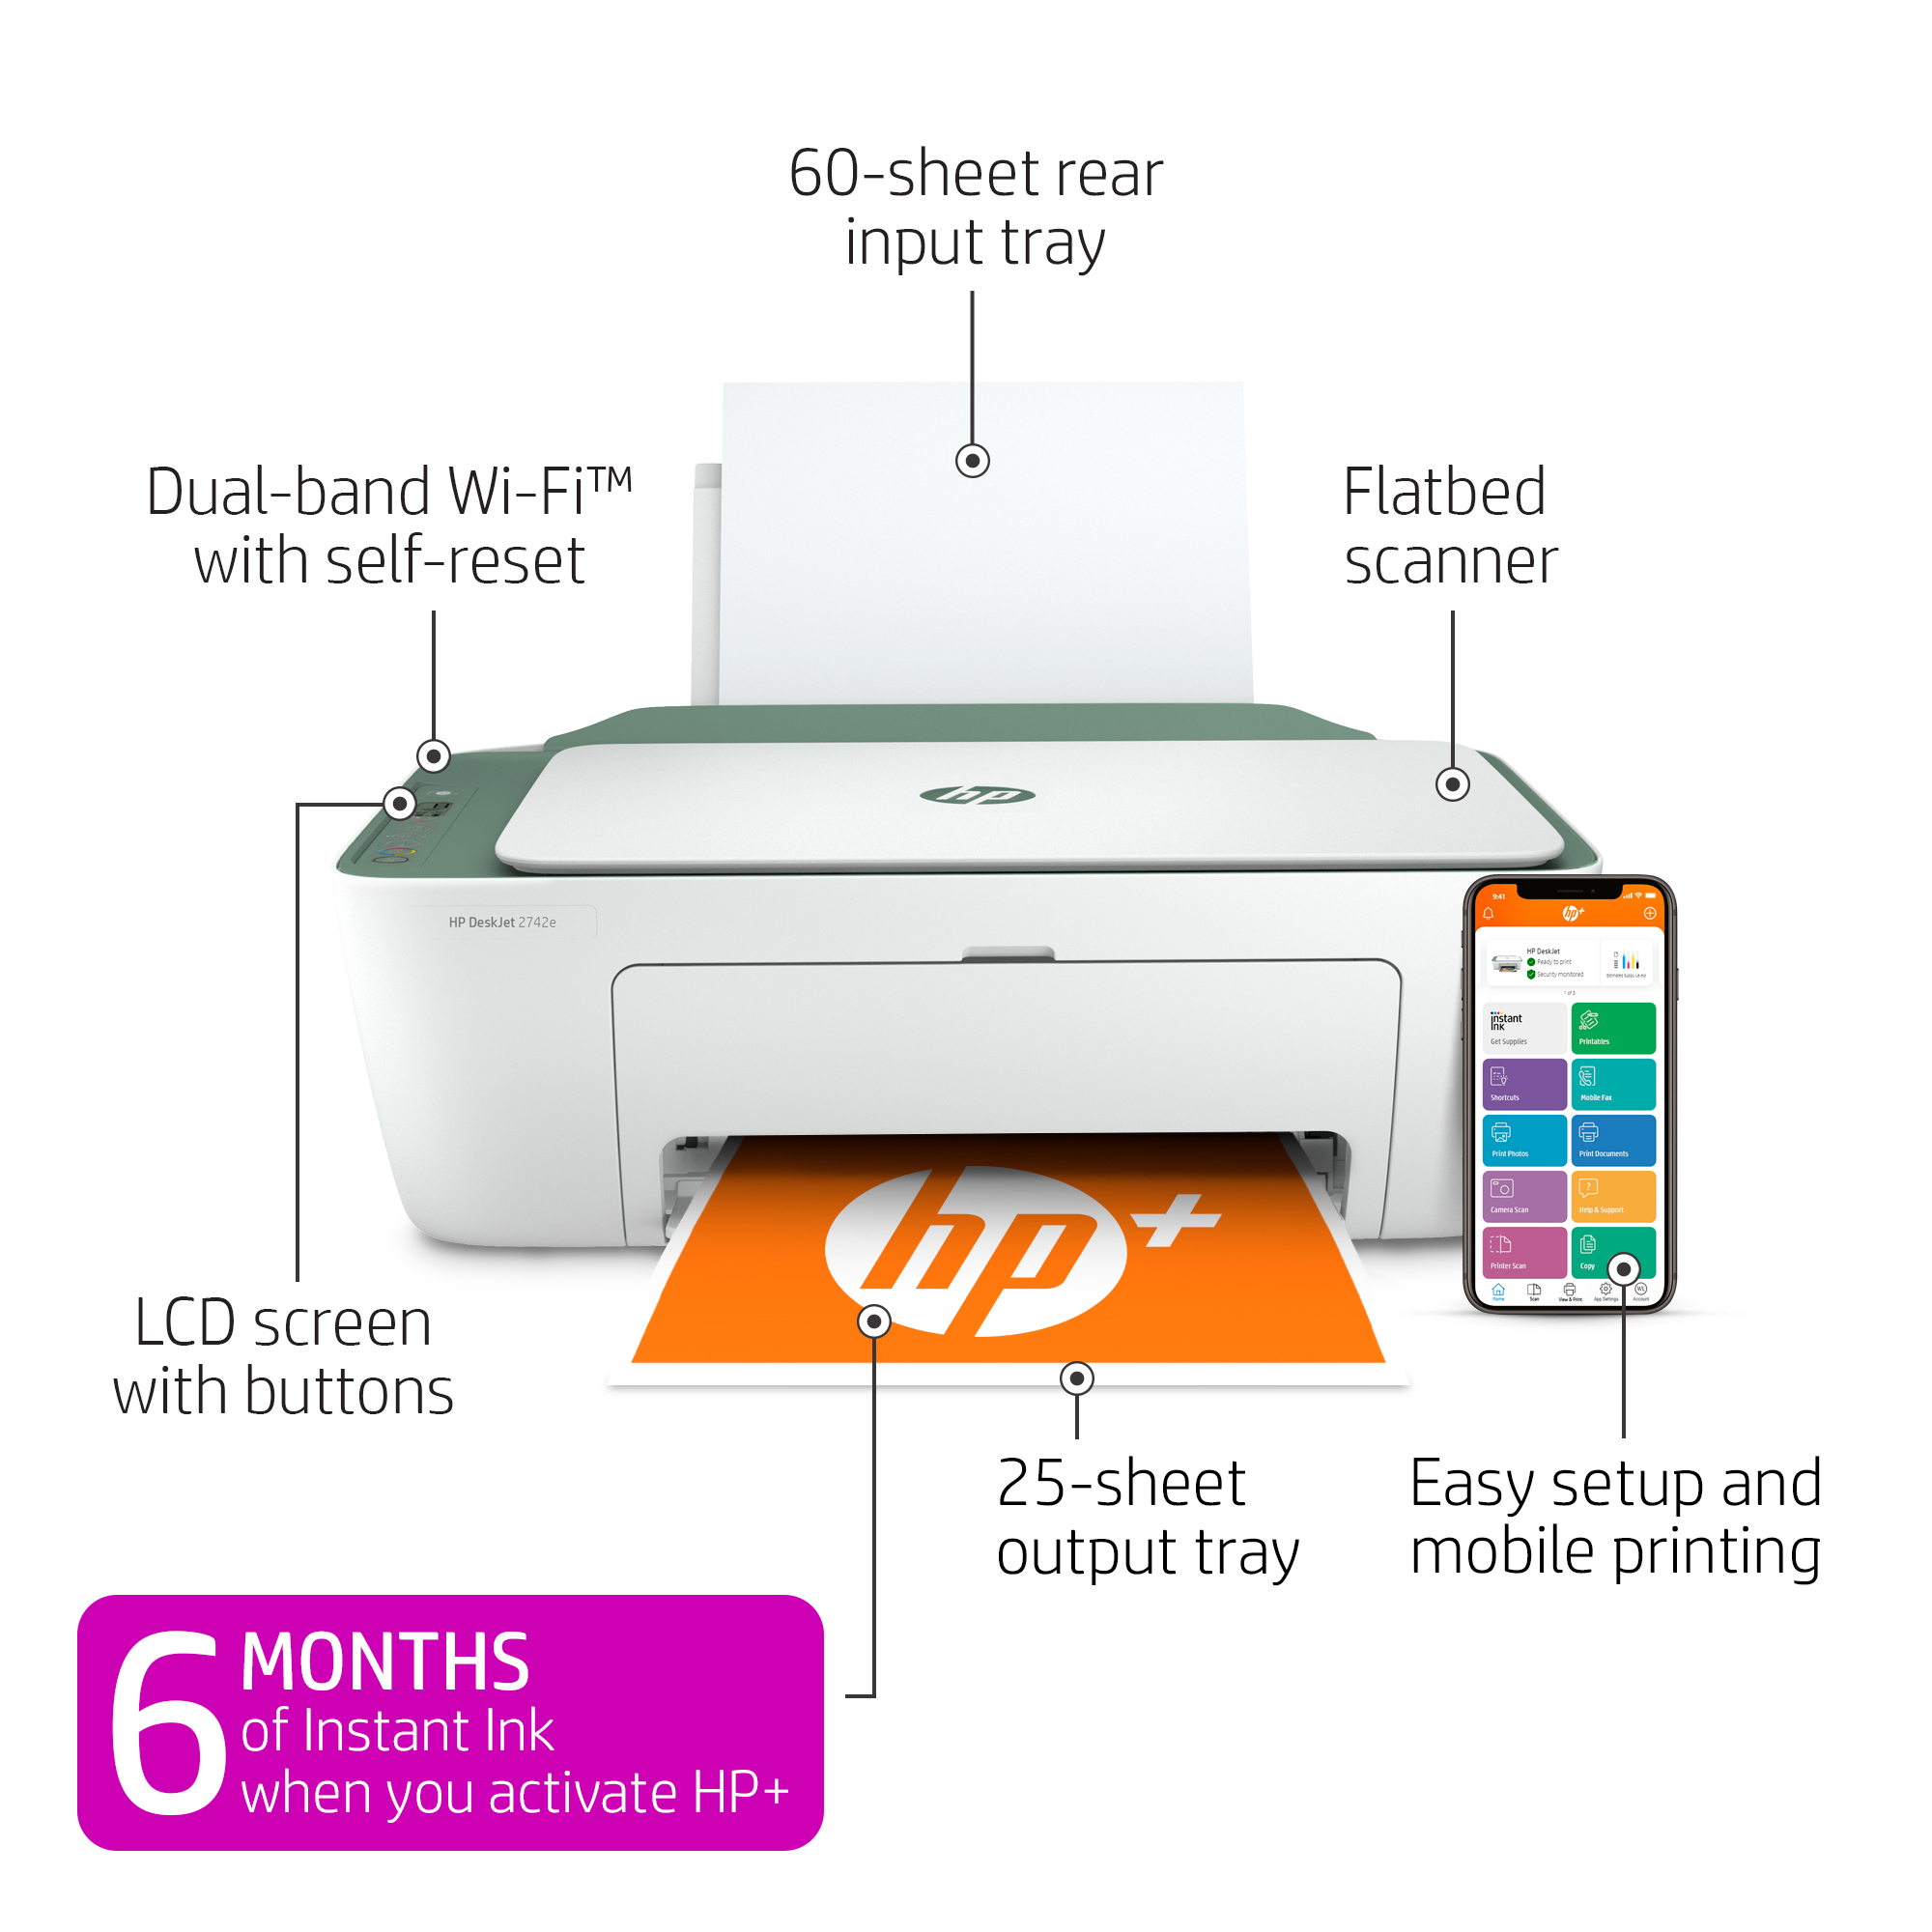 HP DeskJet 2742e Wireless Color All-in-One Inkjet Printer (Green Matcha) with 6 months Instant Ink Included with HP+ - image 4 of 10